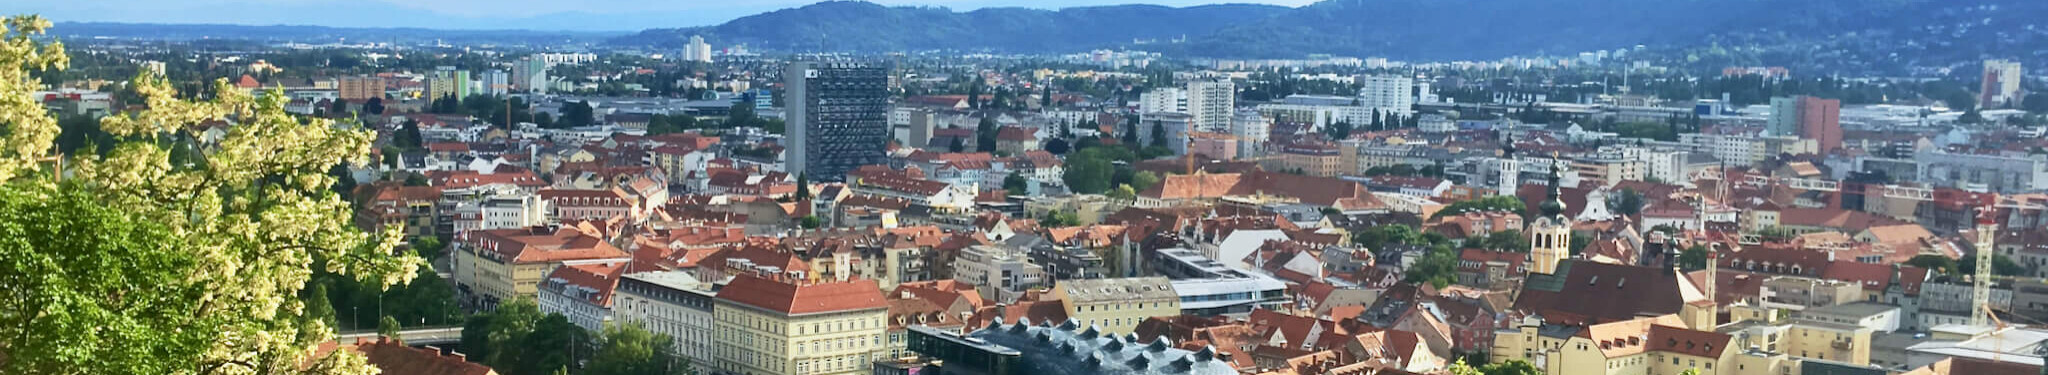 Things to do in Graz - take in views of the city from the Schlossberg